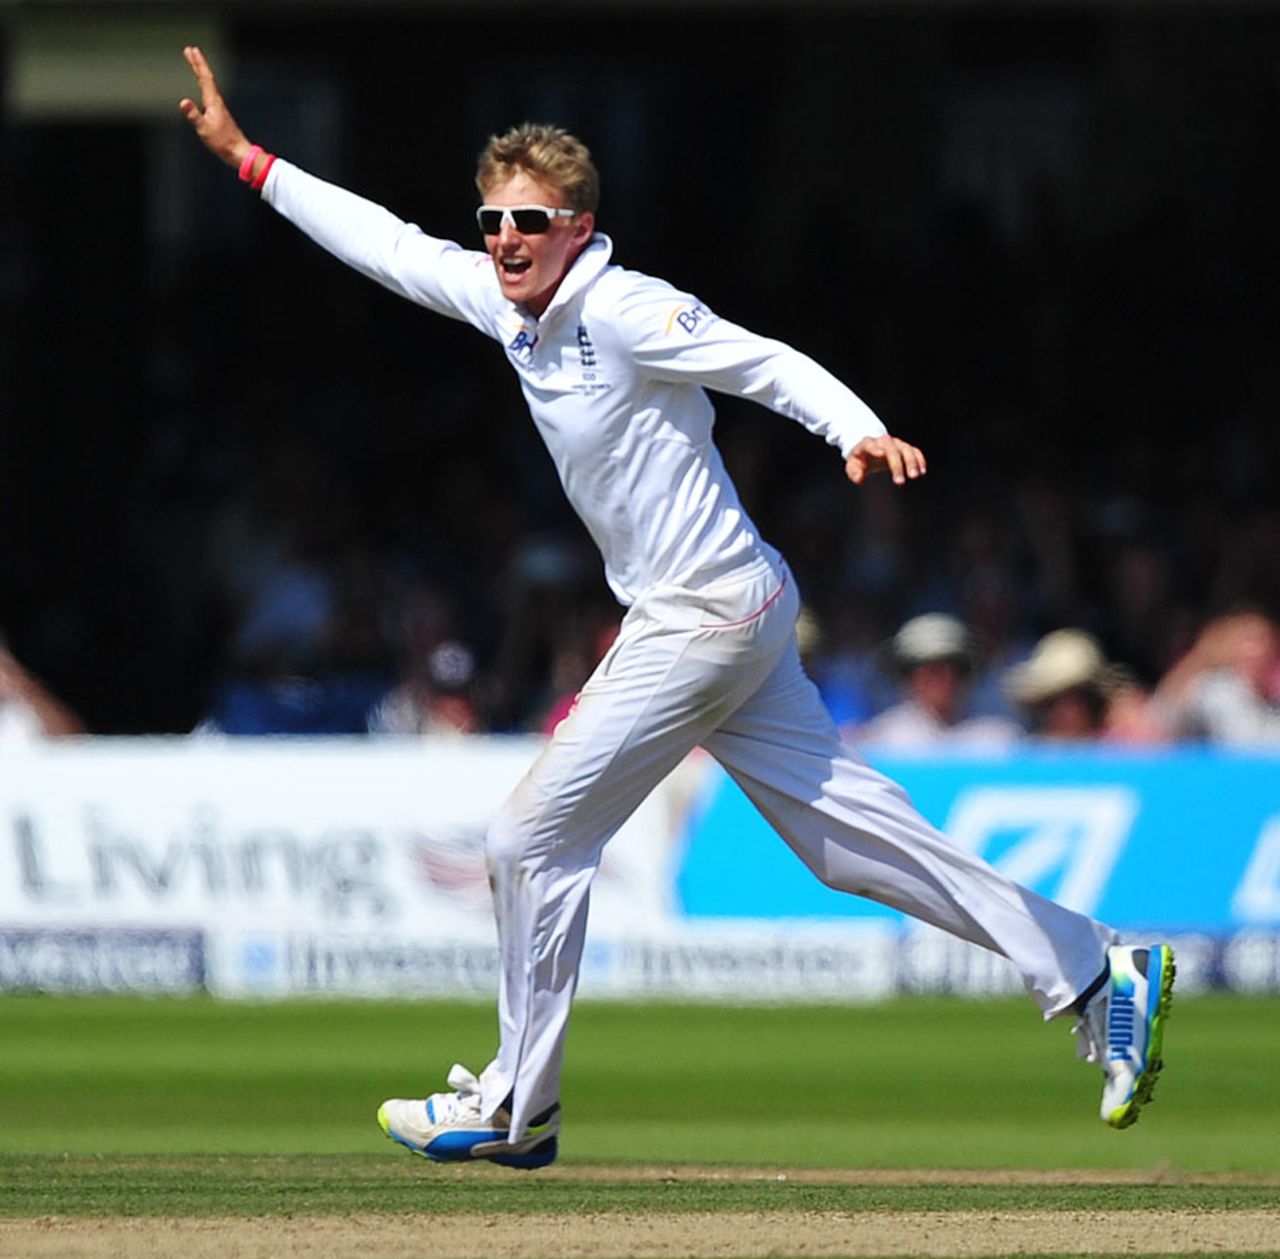 Joe Root picked up two crucial wickets before tea, England v Australia, 2nd Investec Test, Lord's, 4th day, July 21, 2013